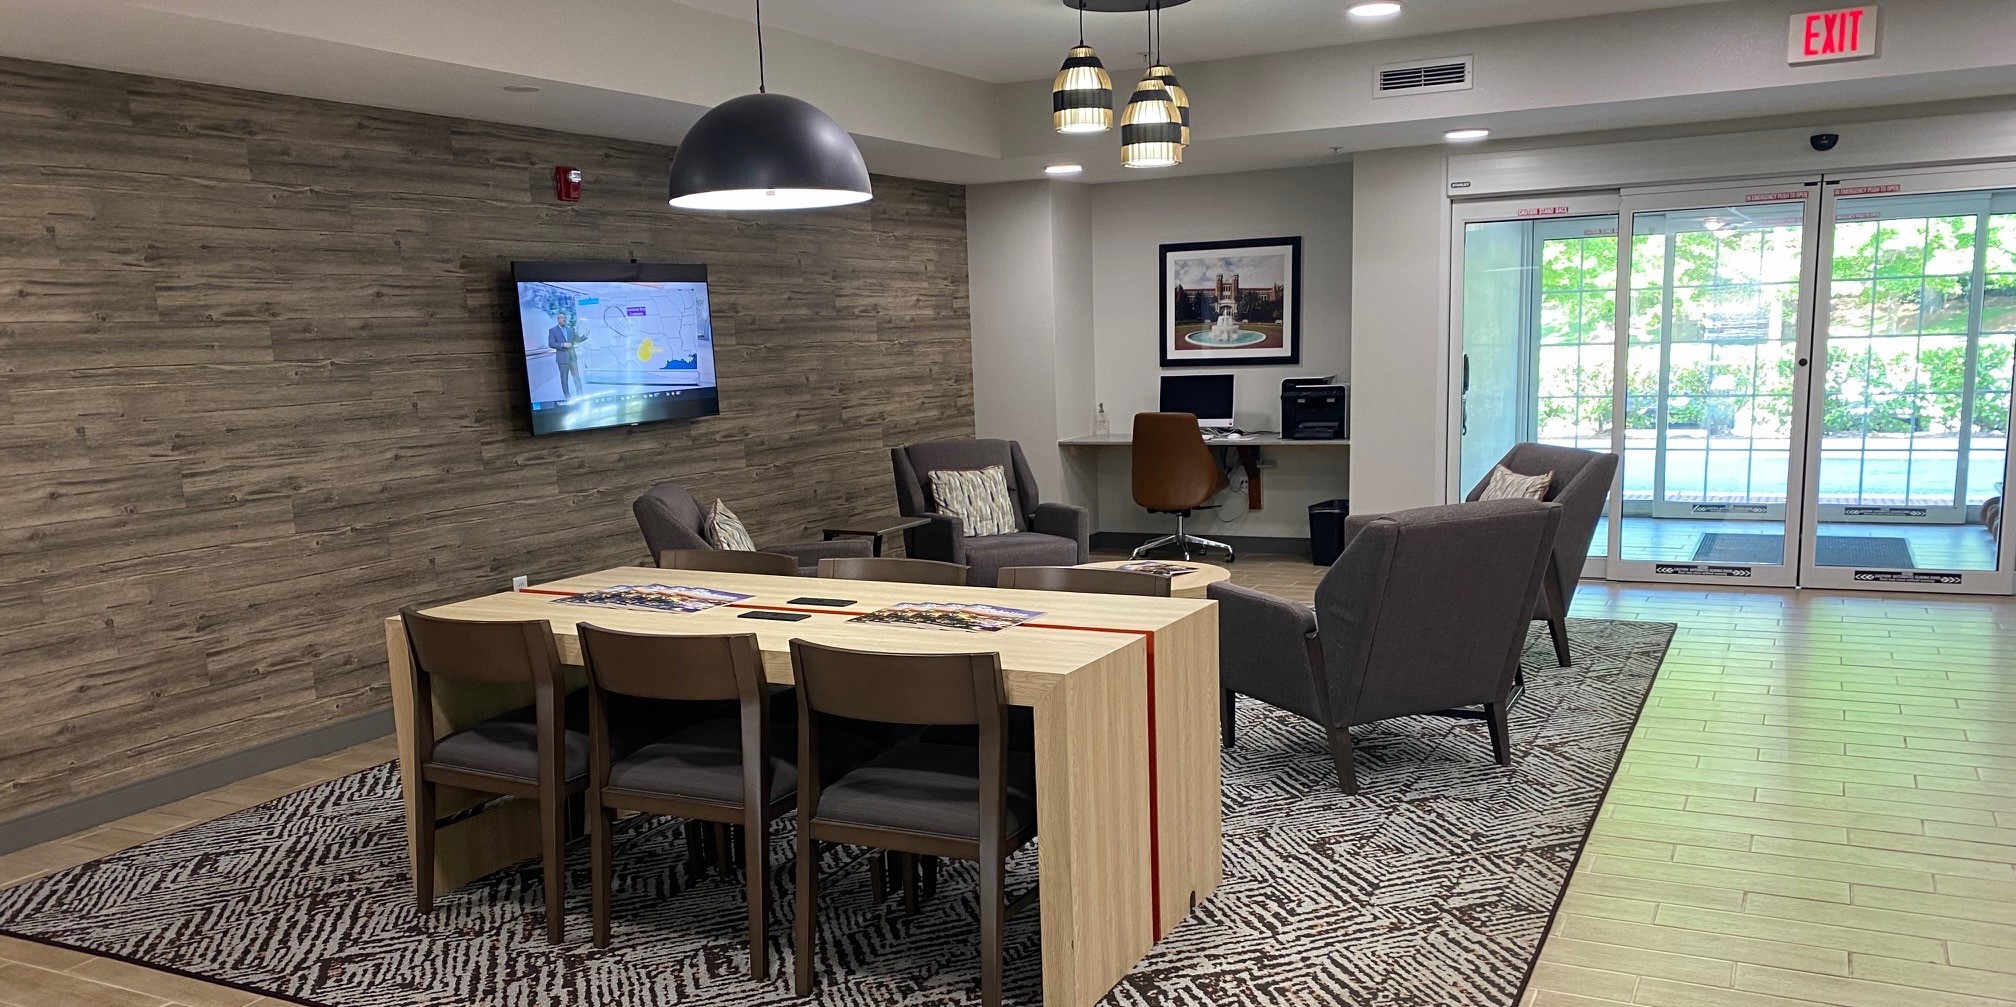  CANDLEWOOD SUITES – TALLAHASSEE, FL